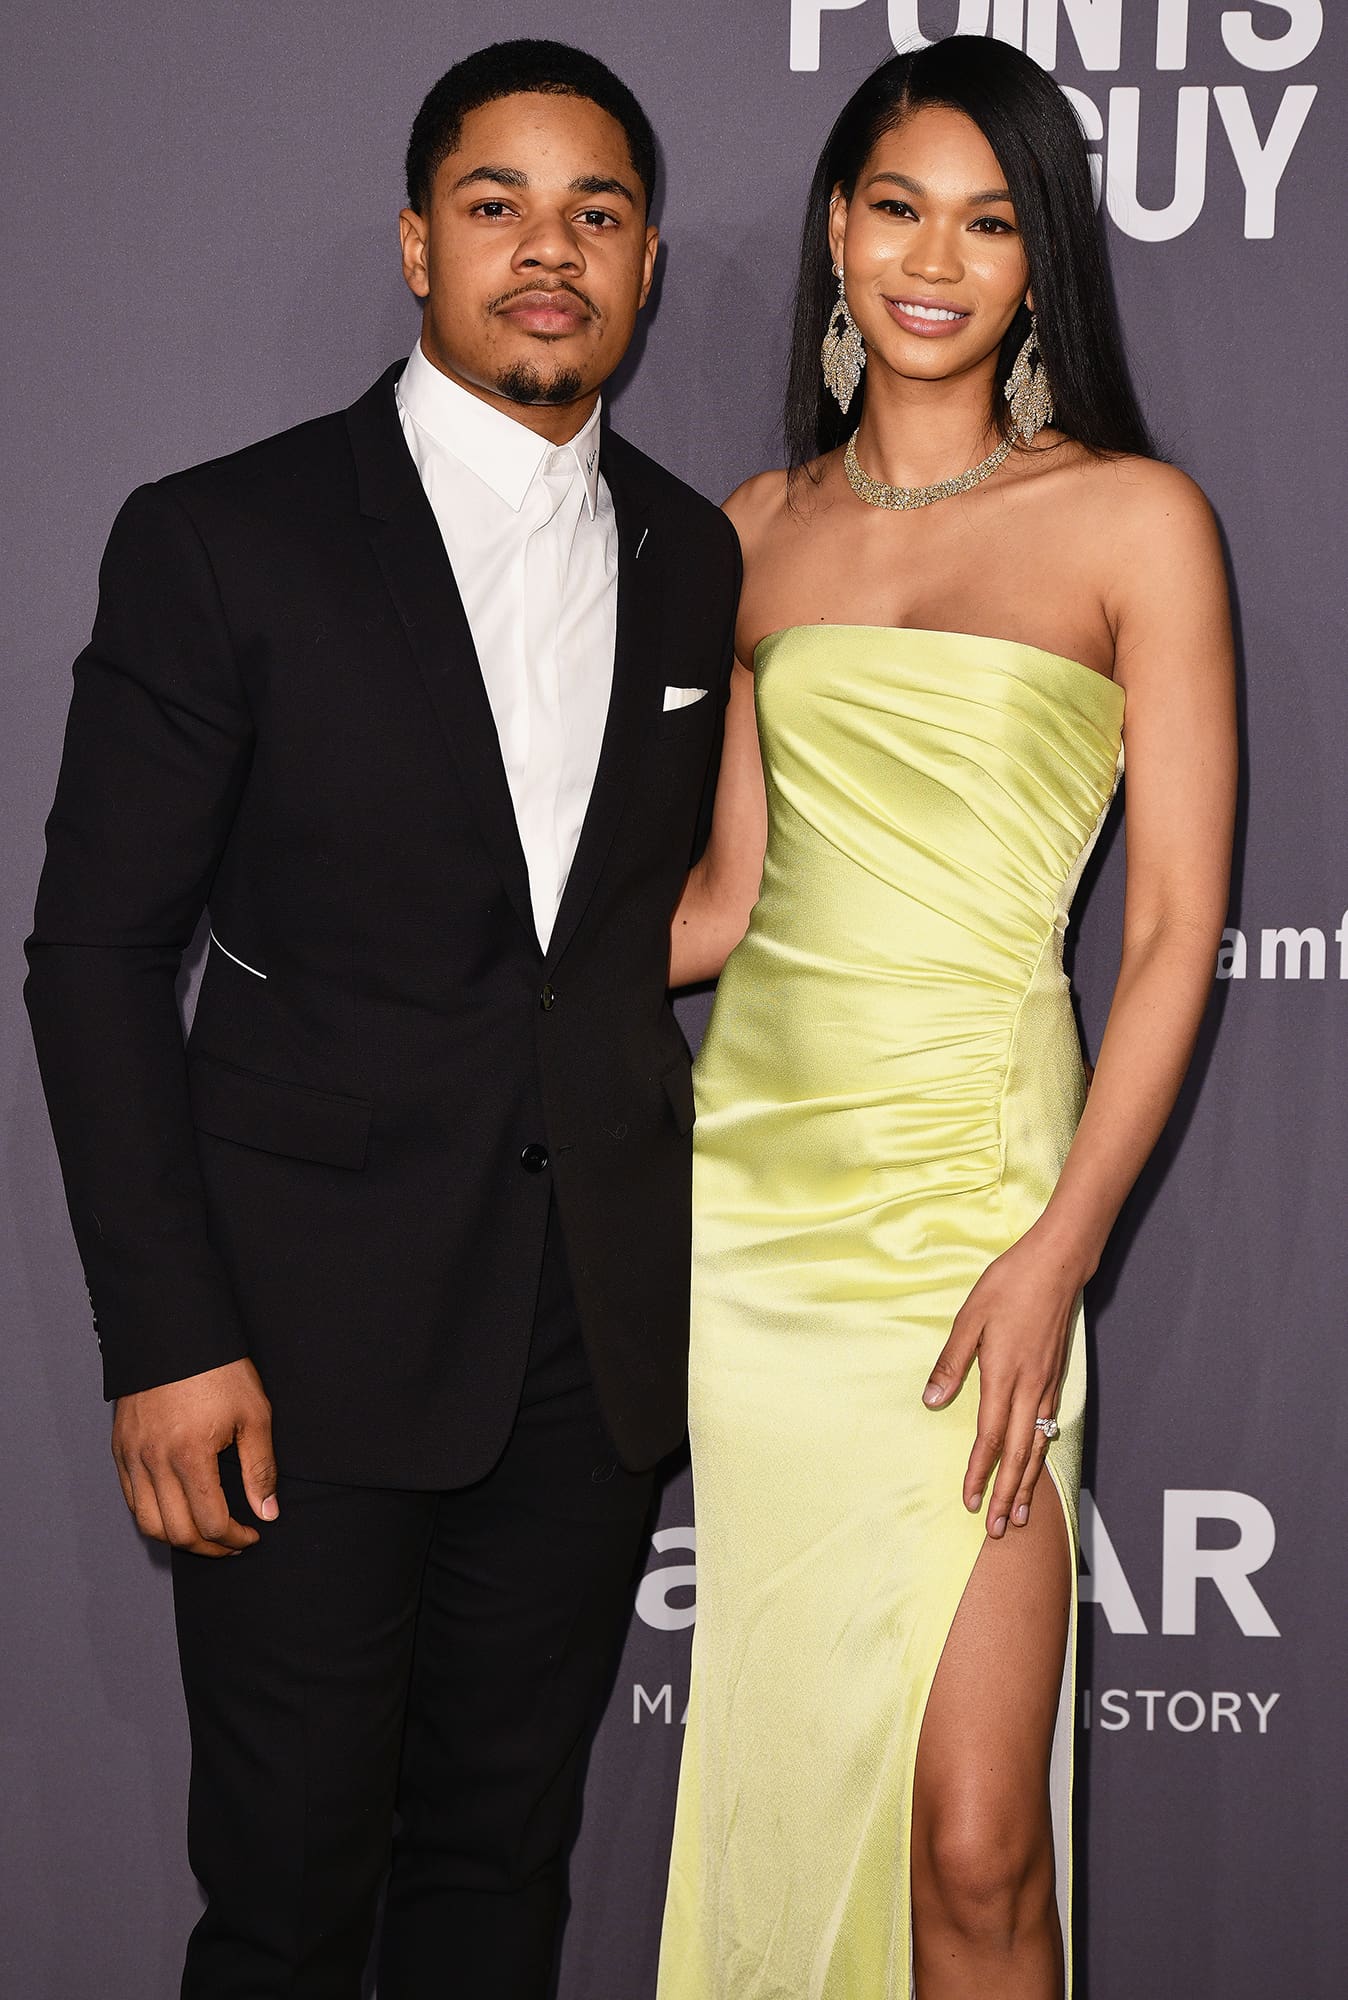 chanel-iman-and-sterling-shepard-are-reportedly-breaking-up